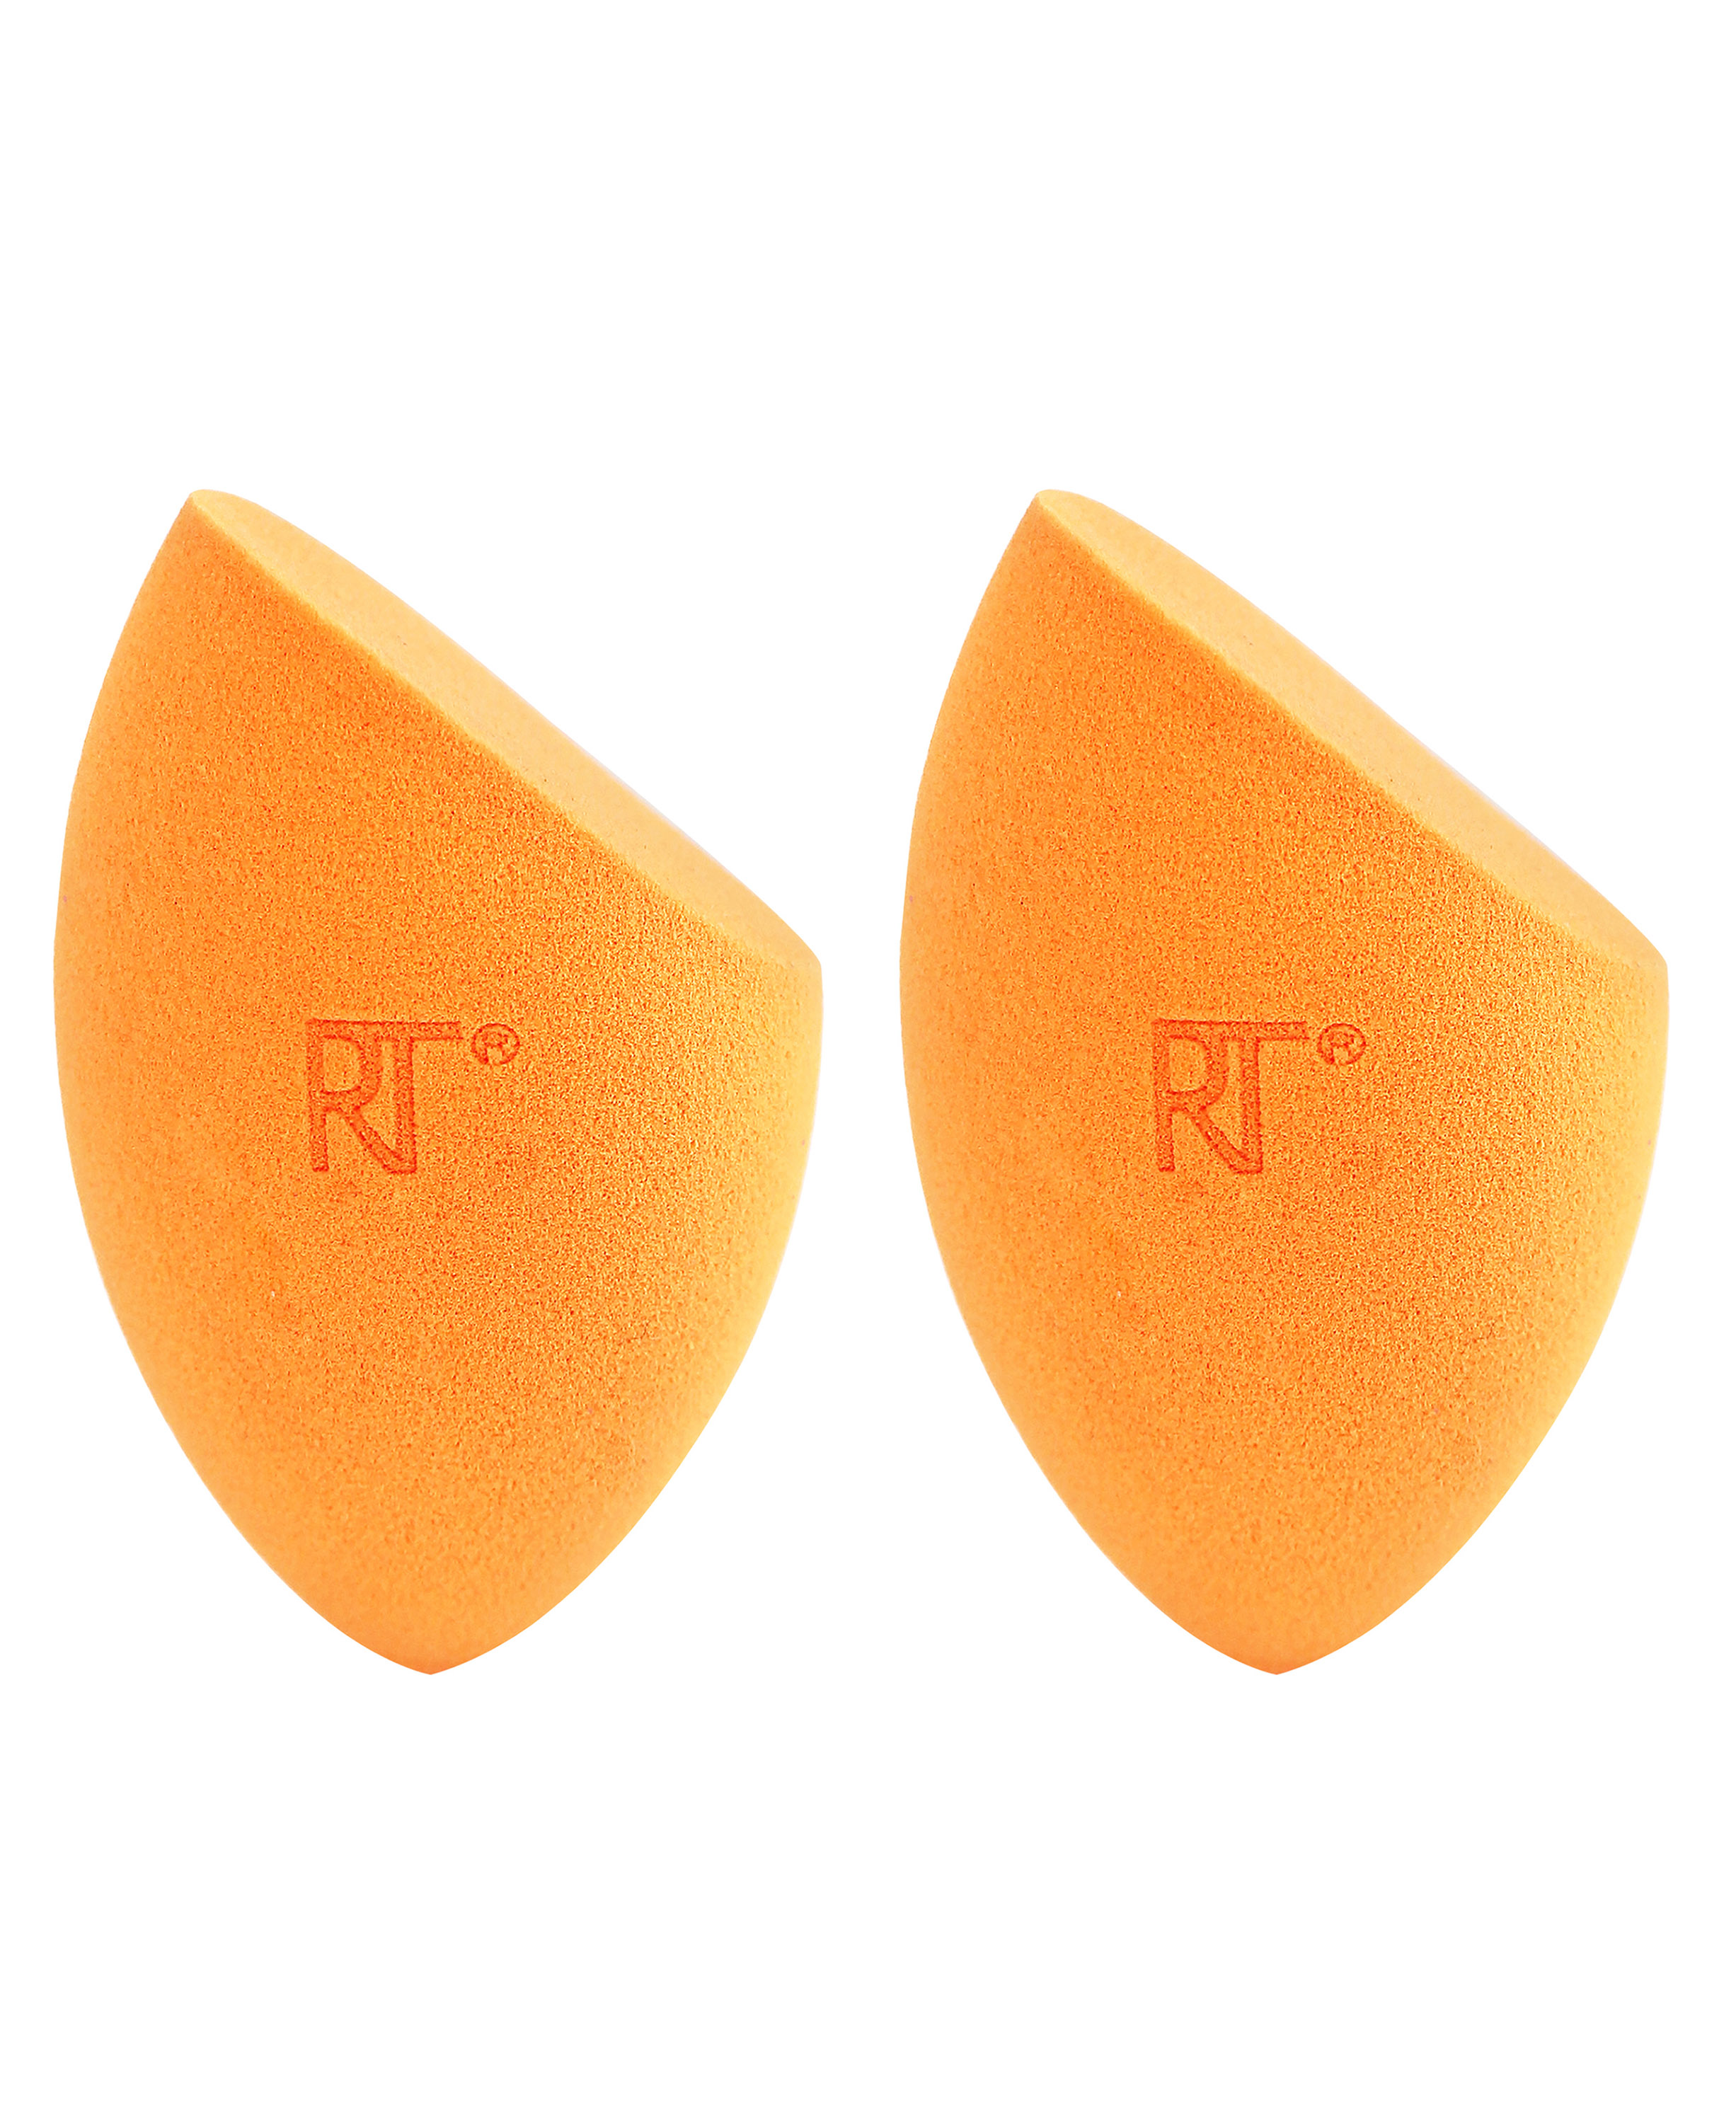 Miracle Complexion Sponges, 2 stk